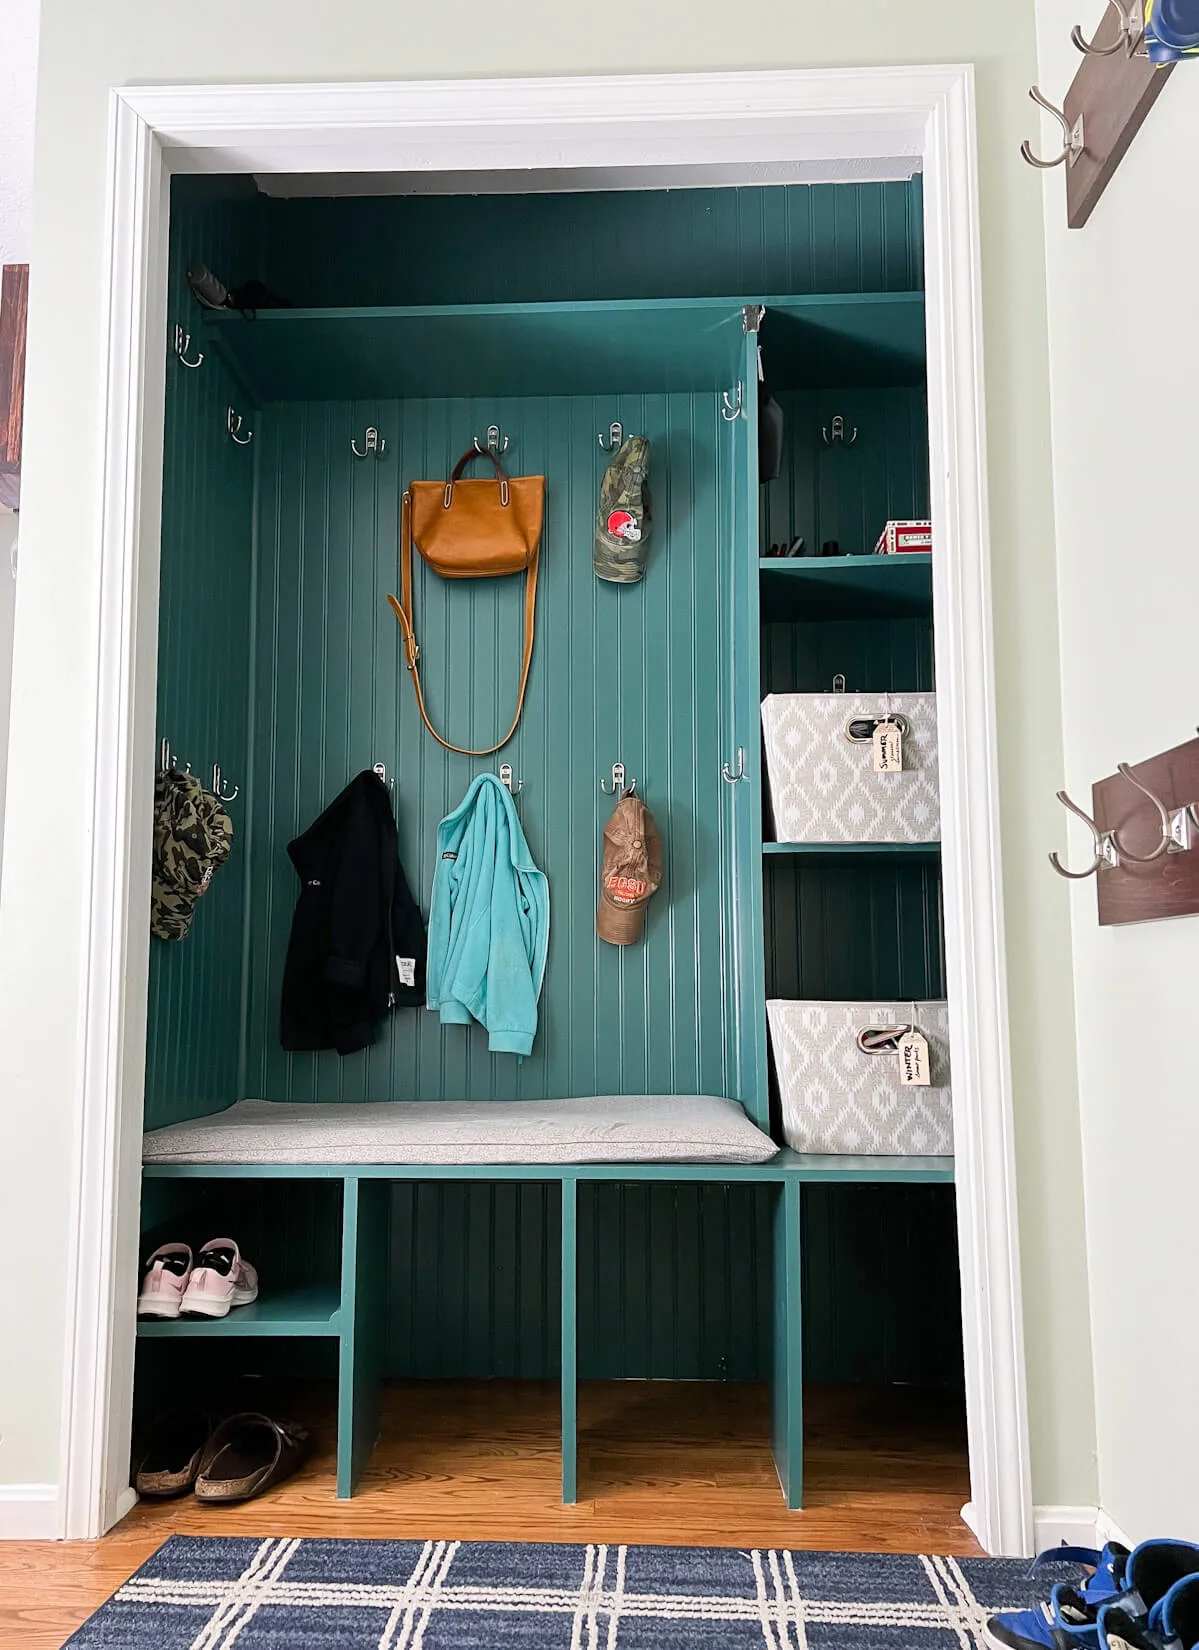 items hanging in finished painted cubby mudroom closet.